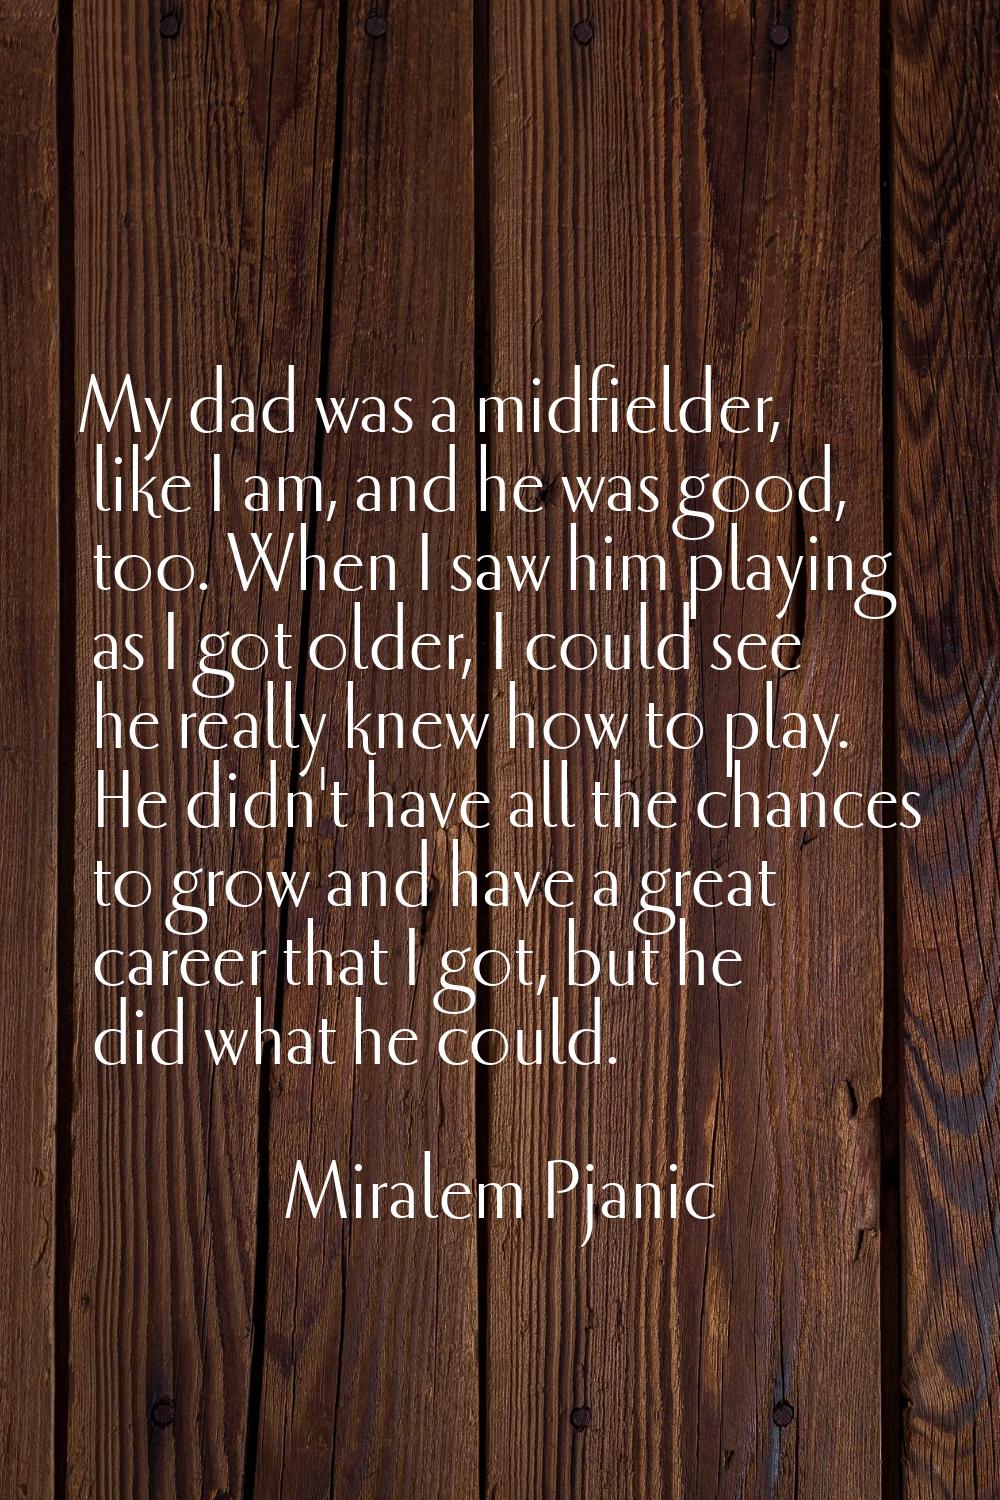 My dad was a midfielder, like I am, and he was good, too. When I saw him playing as I got older, I 